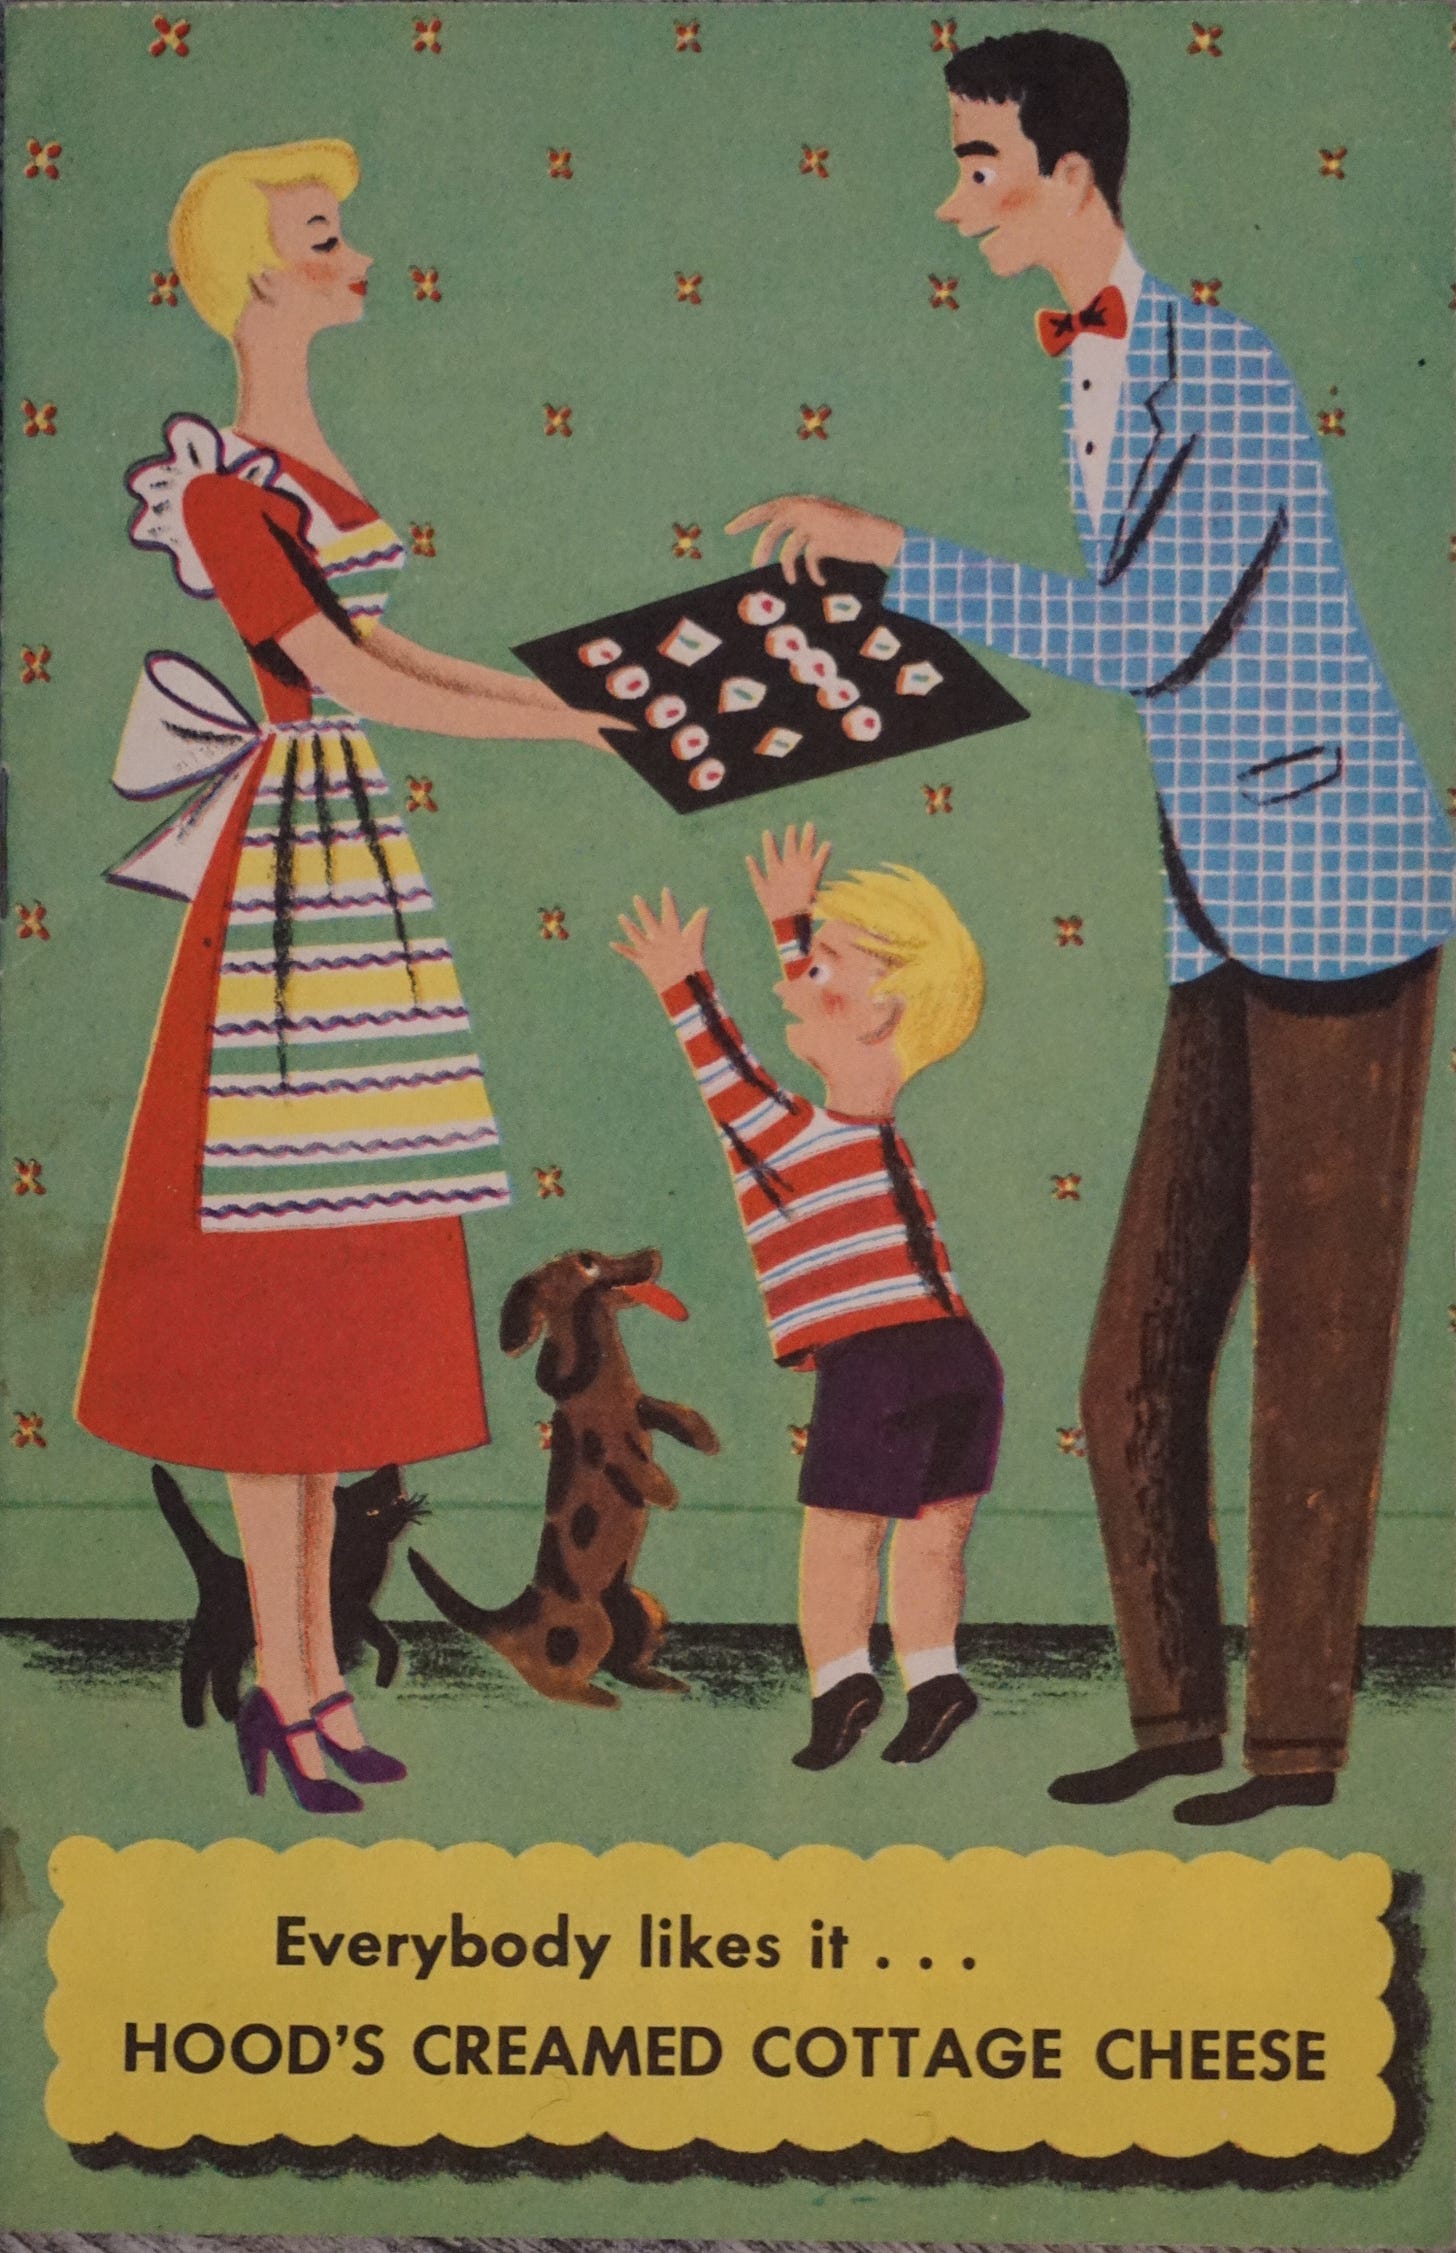 Photo of the cover of a promotional pamphlet for Hood's Creamed Cottage Cheese, which has the words "everybody likes it..." before the title. It shows a retro (60s?) drawing of a housewife in a red dress and apron holding out a tray of...something. Cookies? for her husband and son. And dog and cat, maybe. They're there too.